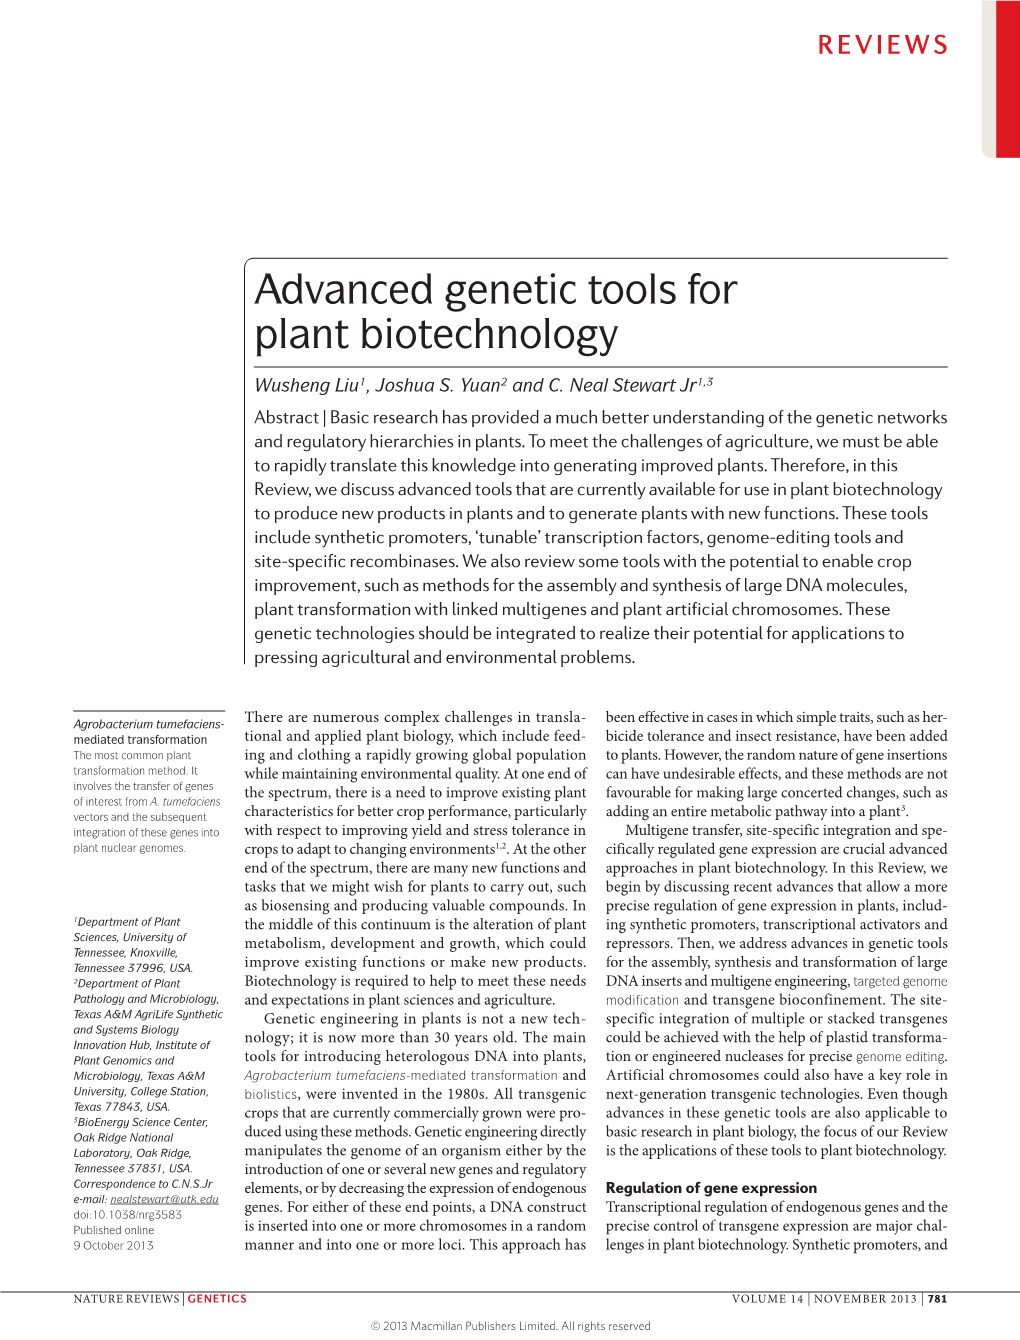 Advanced Genetic Tools for Plant Biotechnology